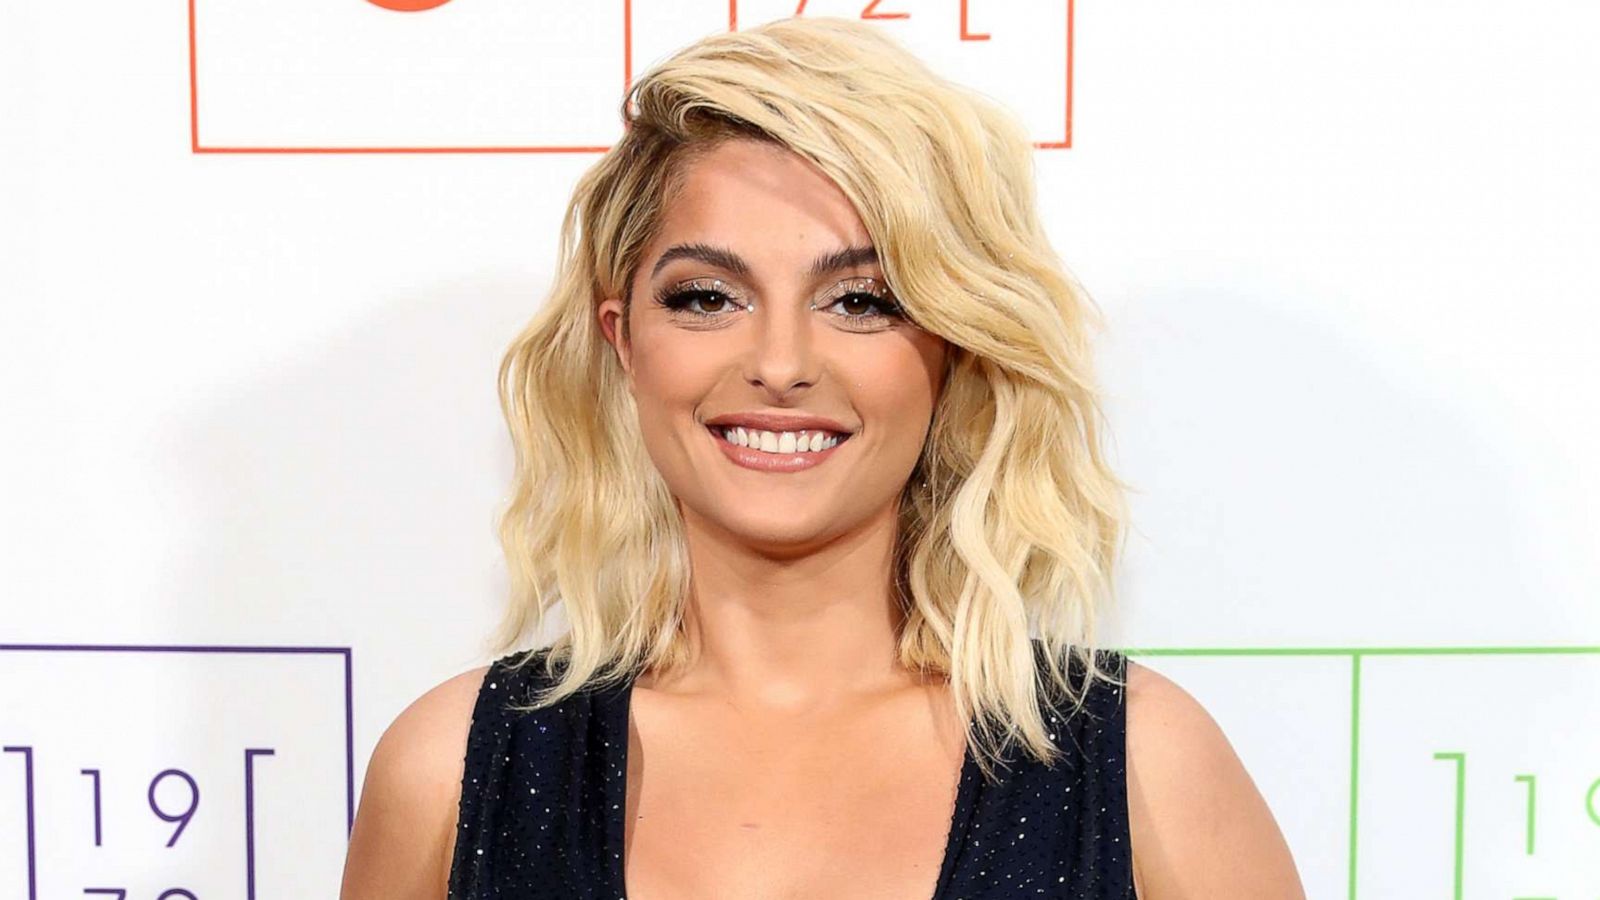 FREE EVENT HAIR* IS OUT! (BEBE REXHA) 